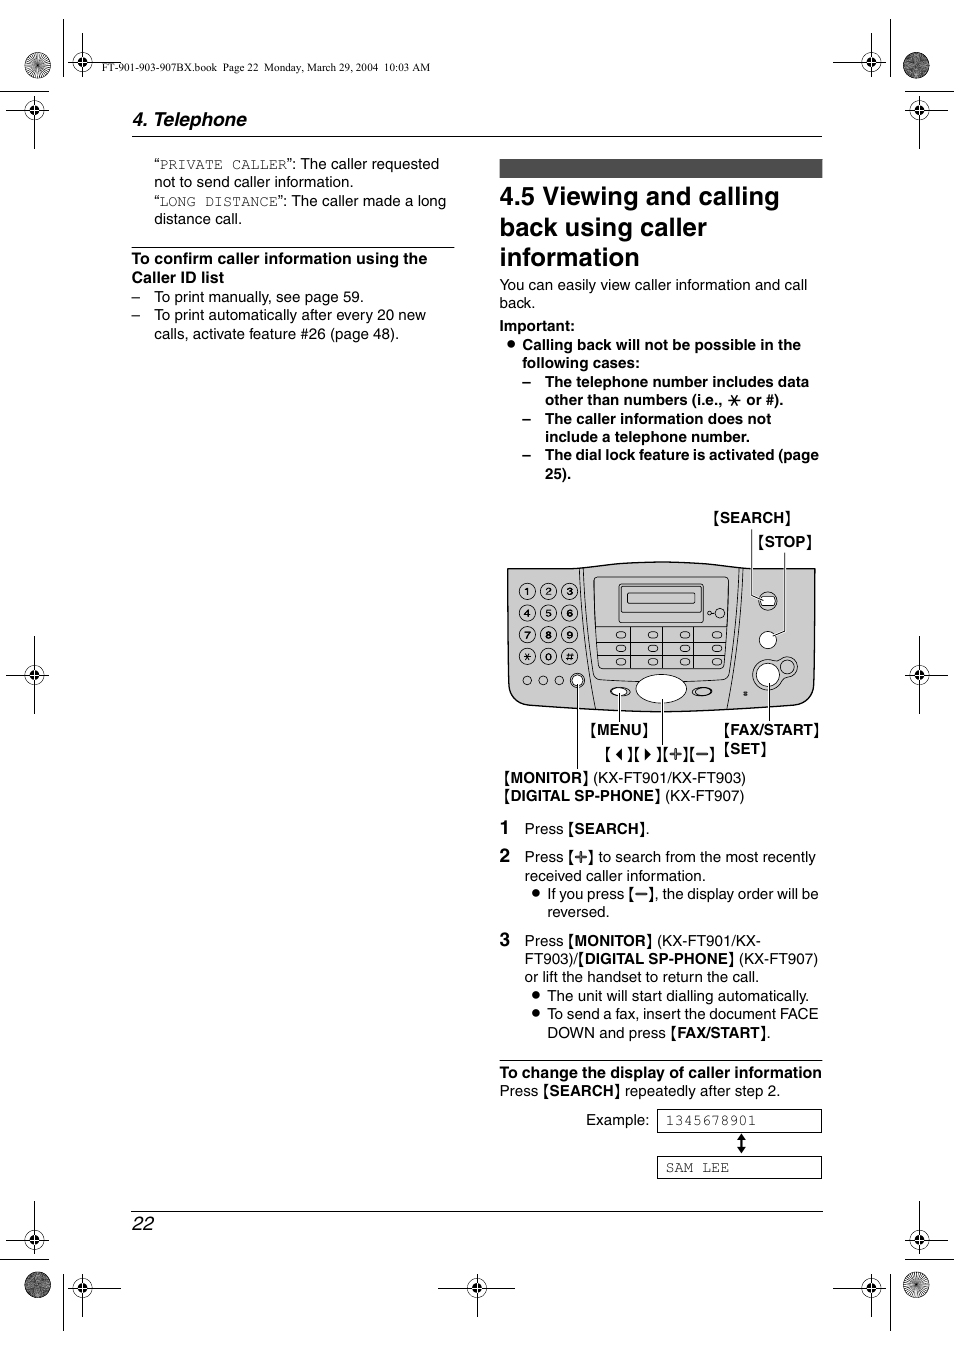 Viewing and calling back using caller information | Panasonic KX-FT901BX User Manual | Page 22 / 64